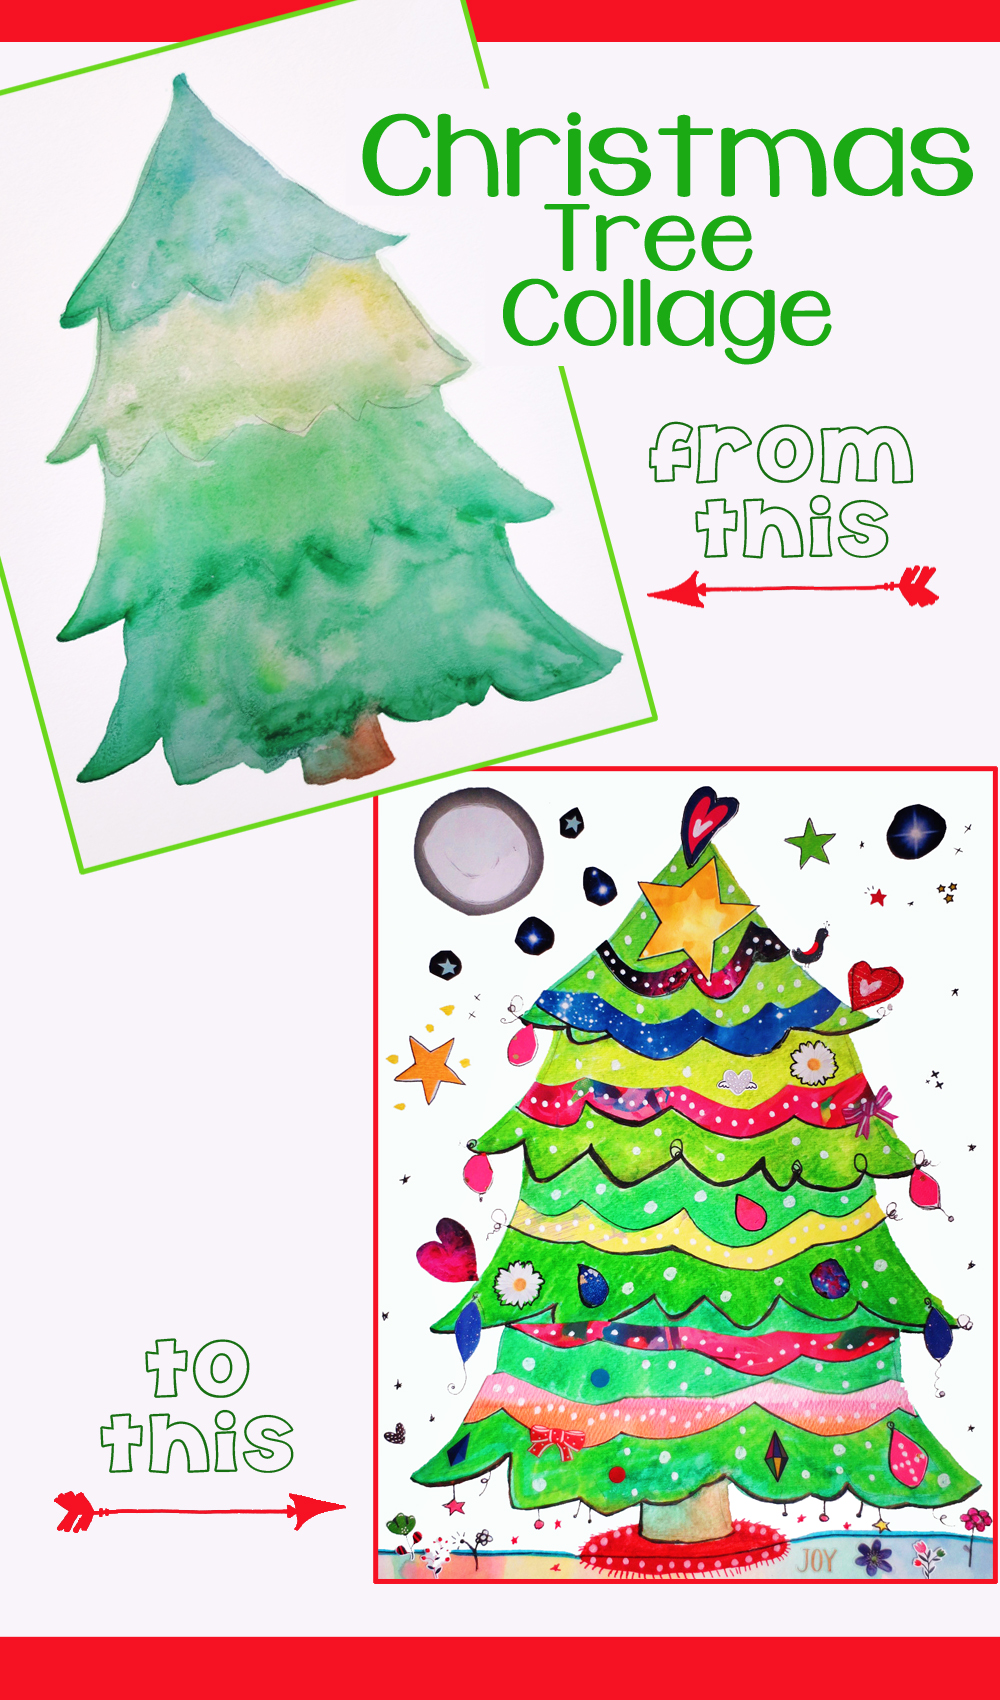 Christmas Tree Collage for Kids